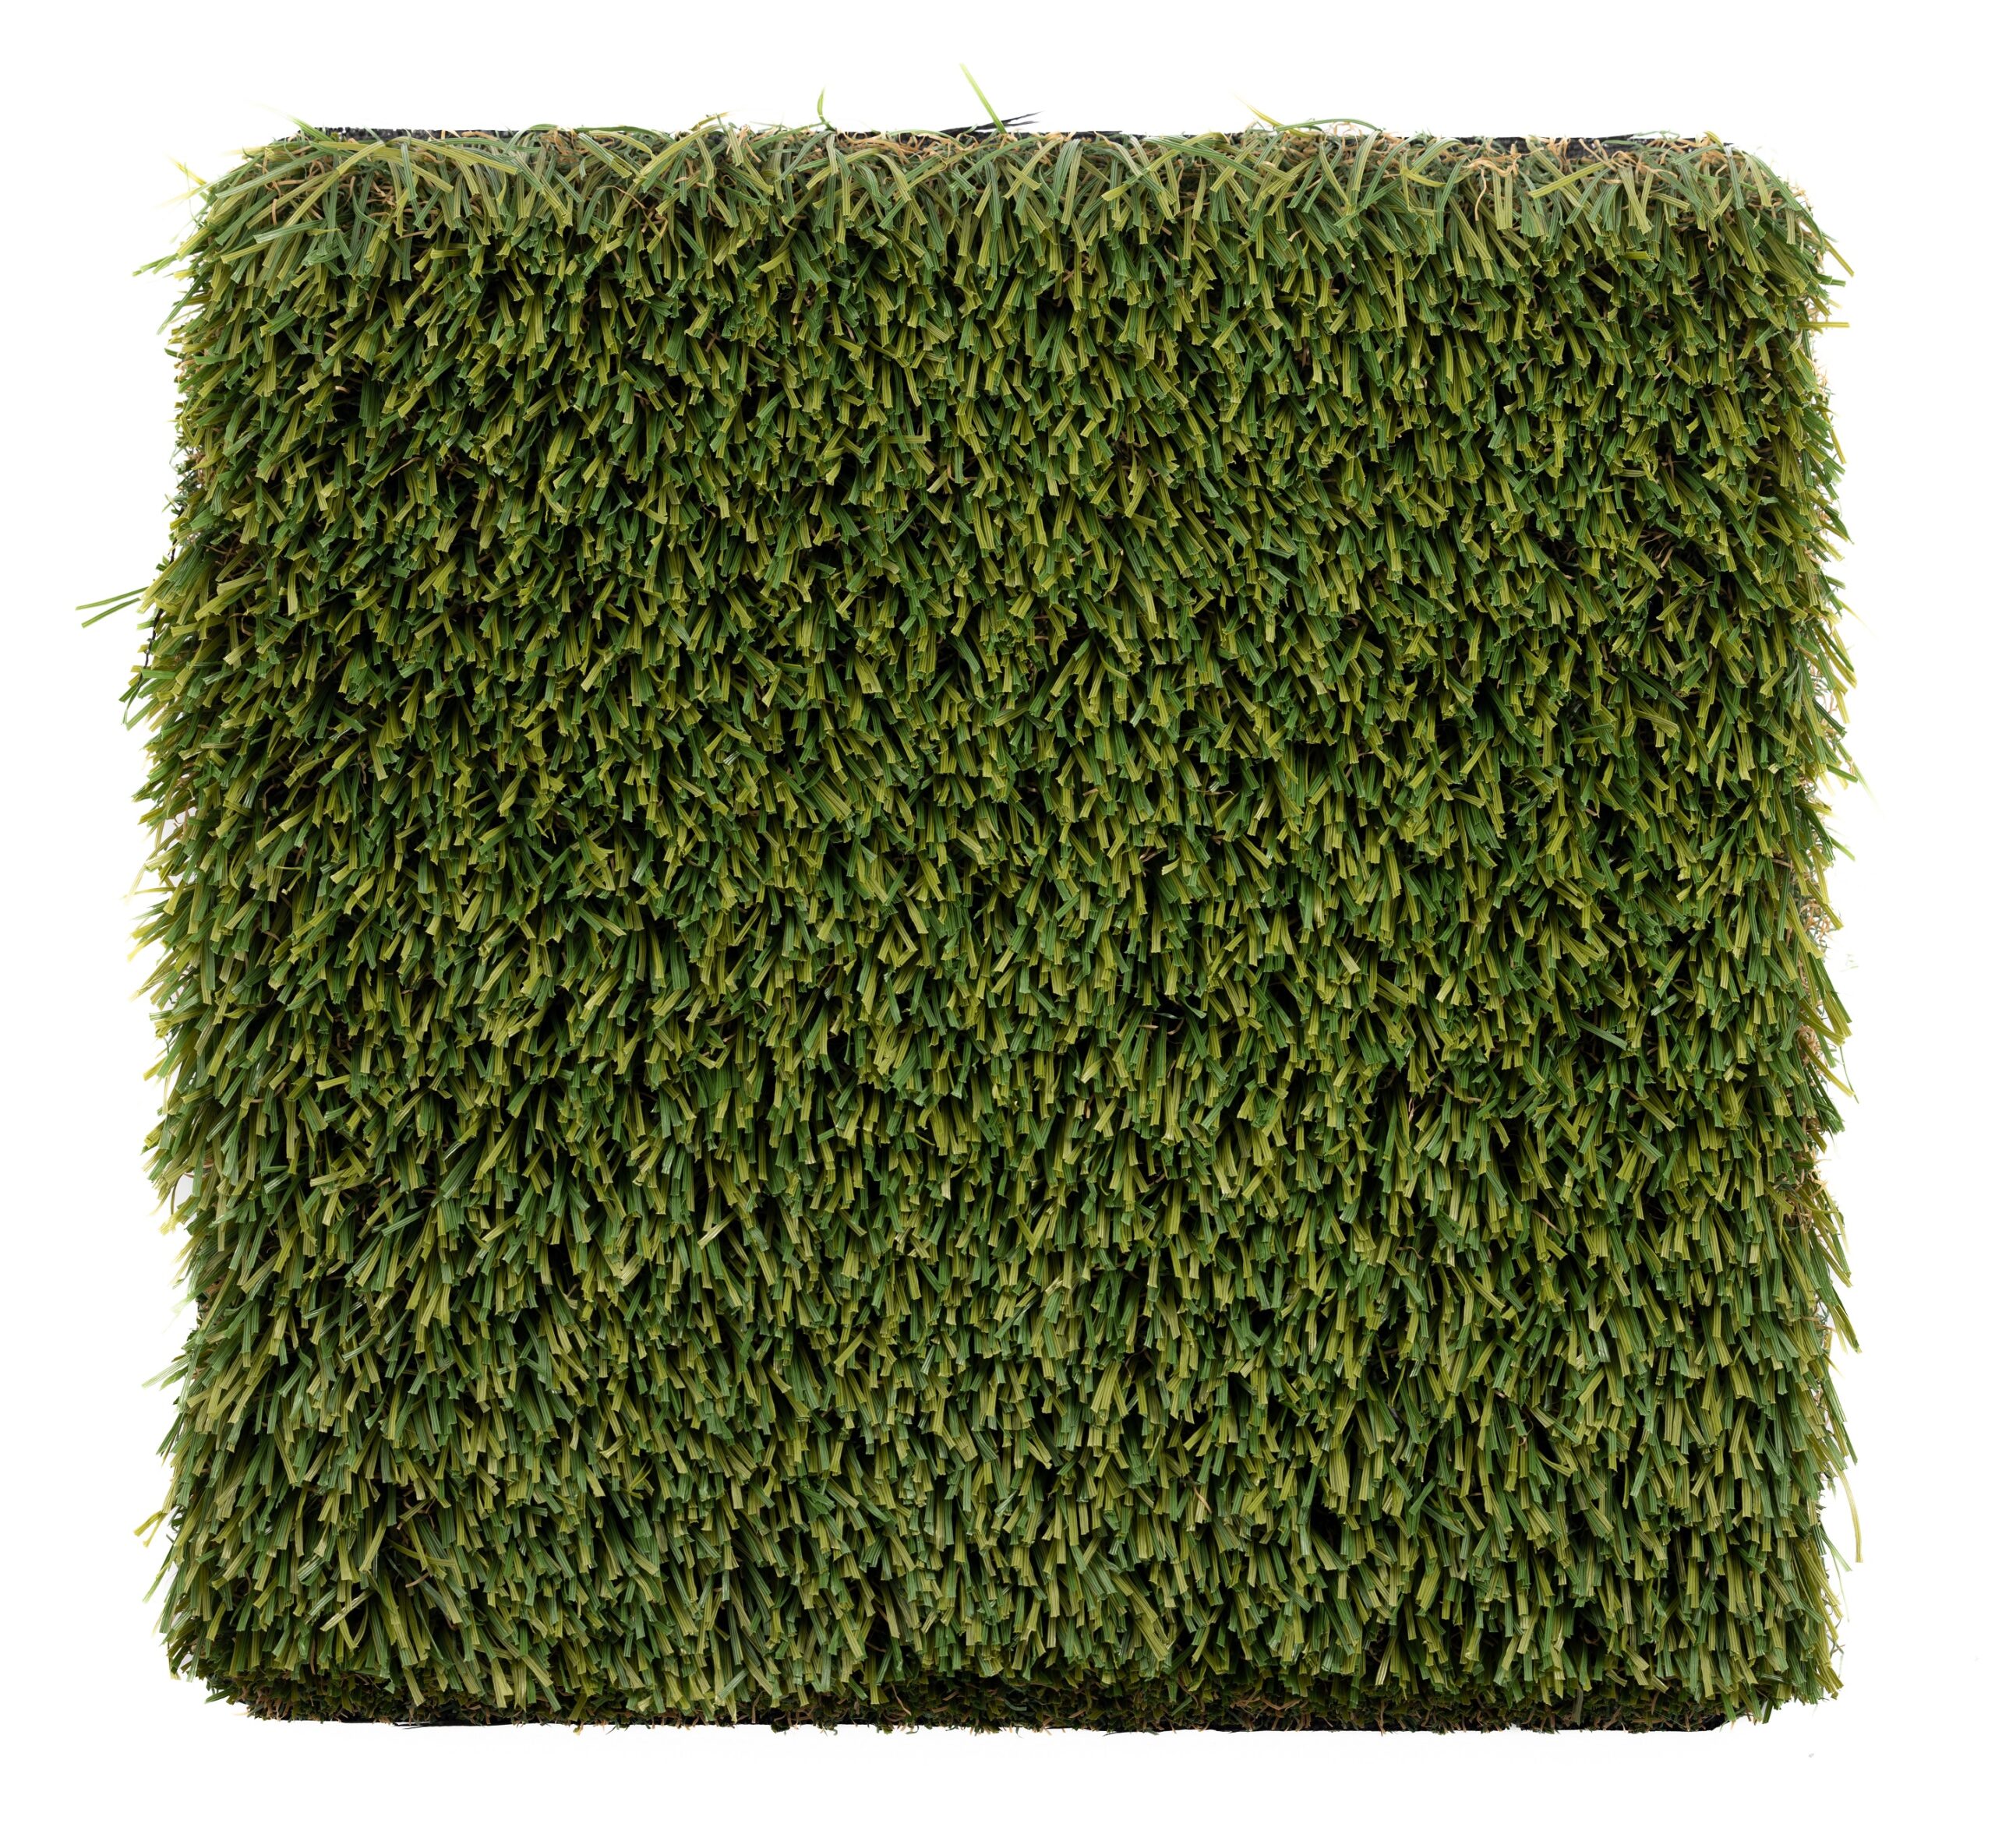 LQ Premium Grass Blades Synthetic Artificial Turf Forest Green Top Side 2